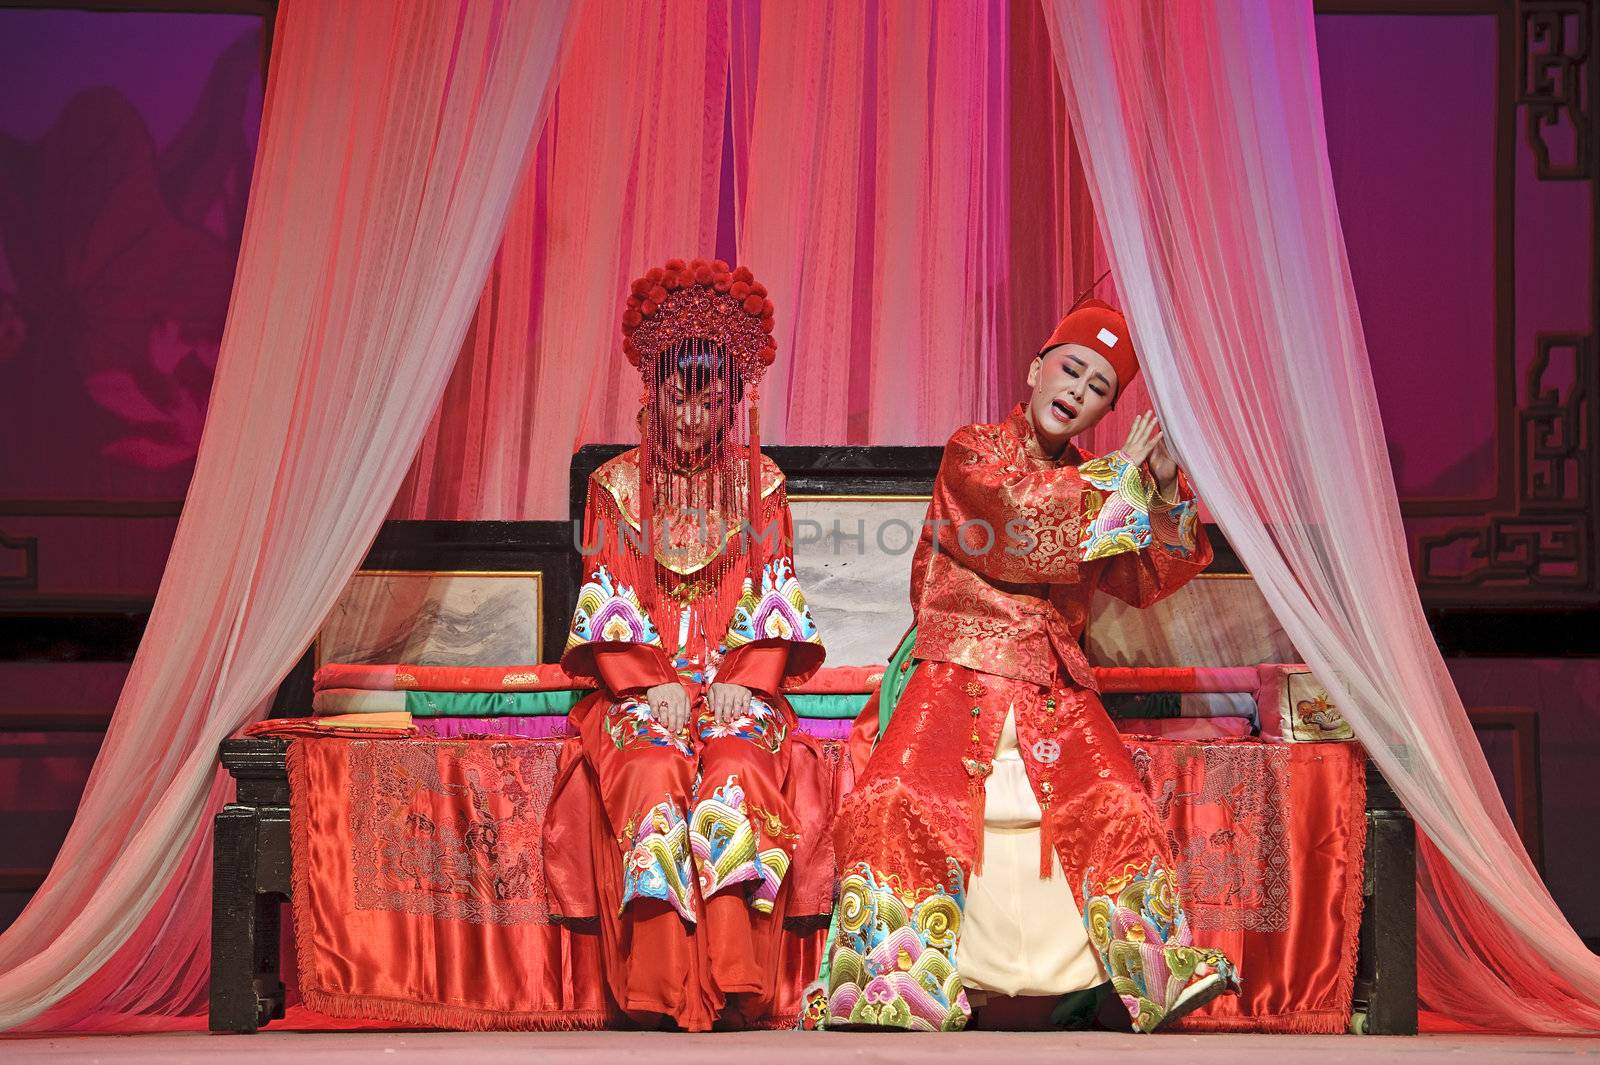 CHENGDU - JUN 3: chinese Yue opera performer make a show on stage to compete for awards in 25th Chinese Drama Plum Blossom Award competition at Experimental theater.Jun 3, 2011 in Chengdu, China.
Chinese Drama Plum Blossom Award is the highest theatrical award in China.